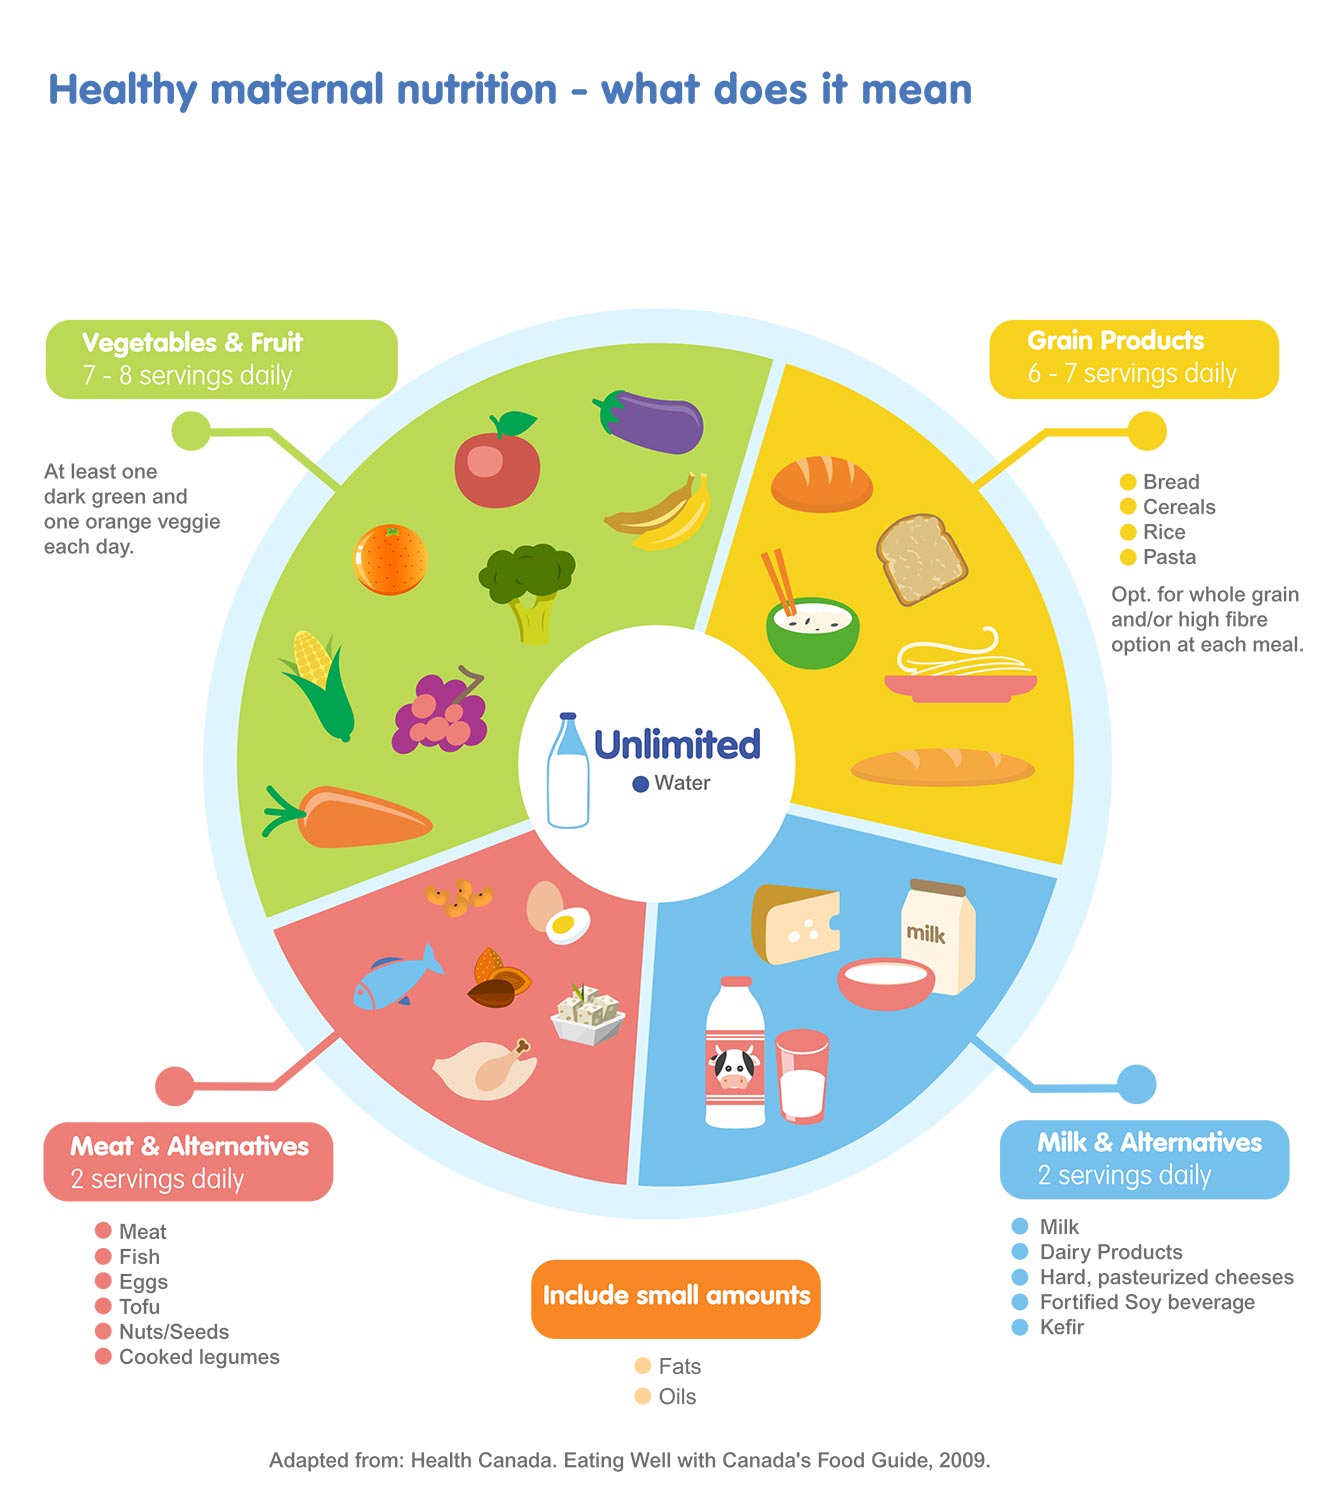 Healthy maternal nutrition